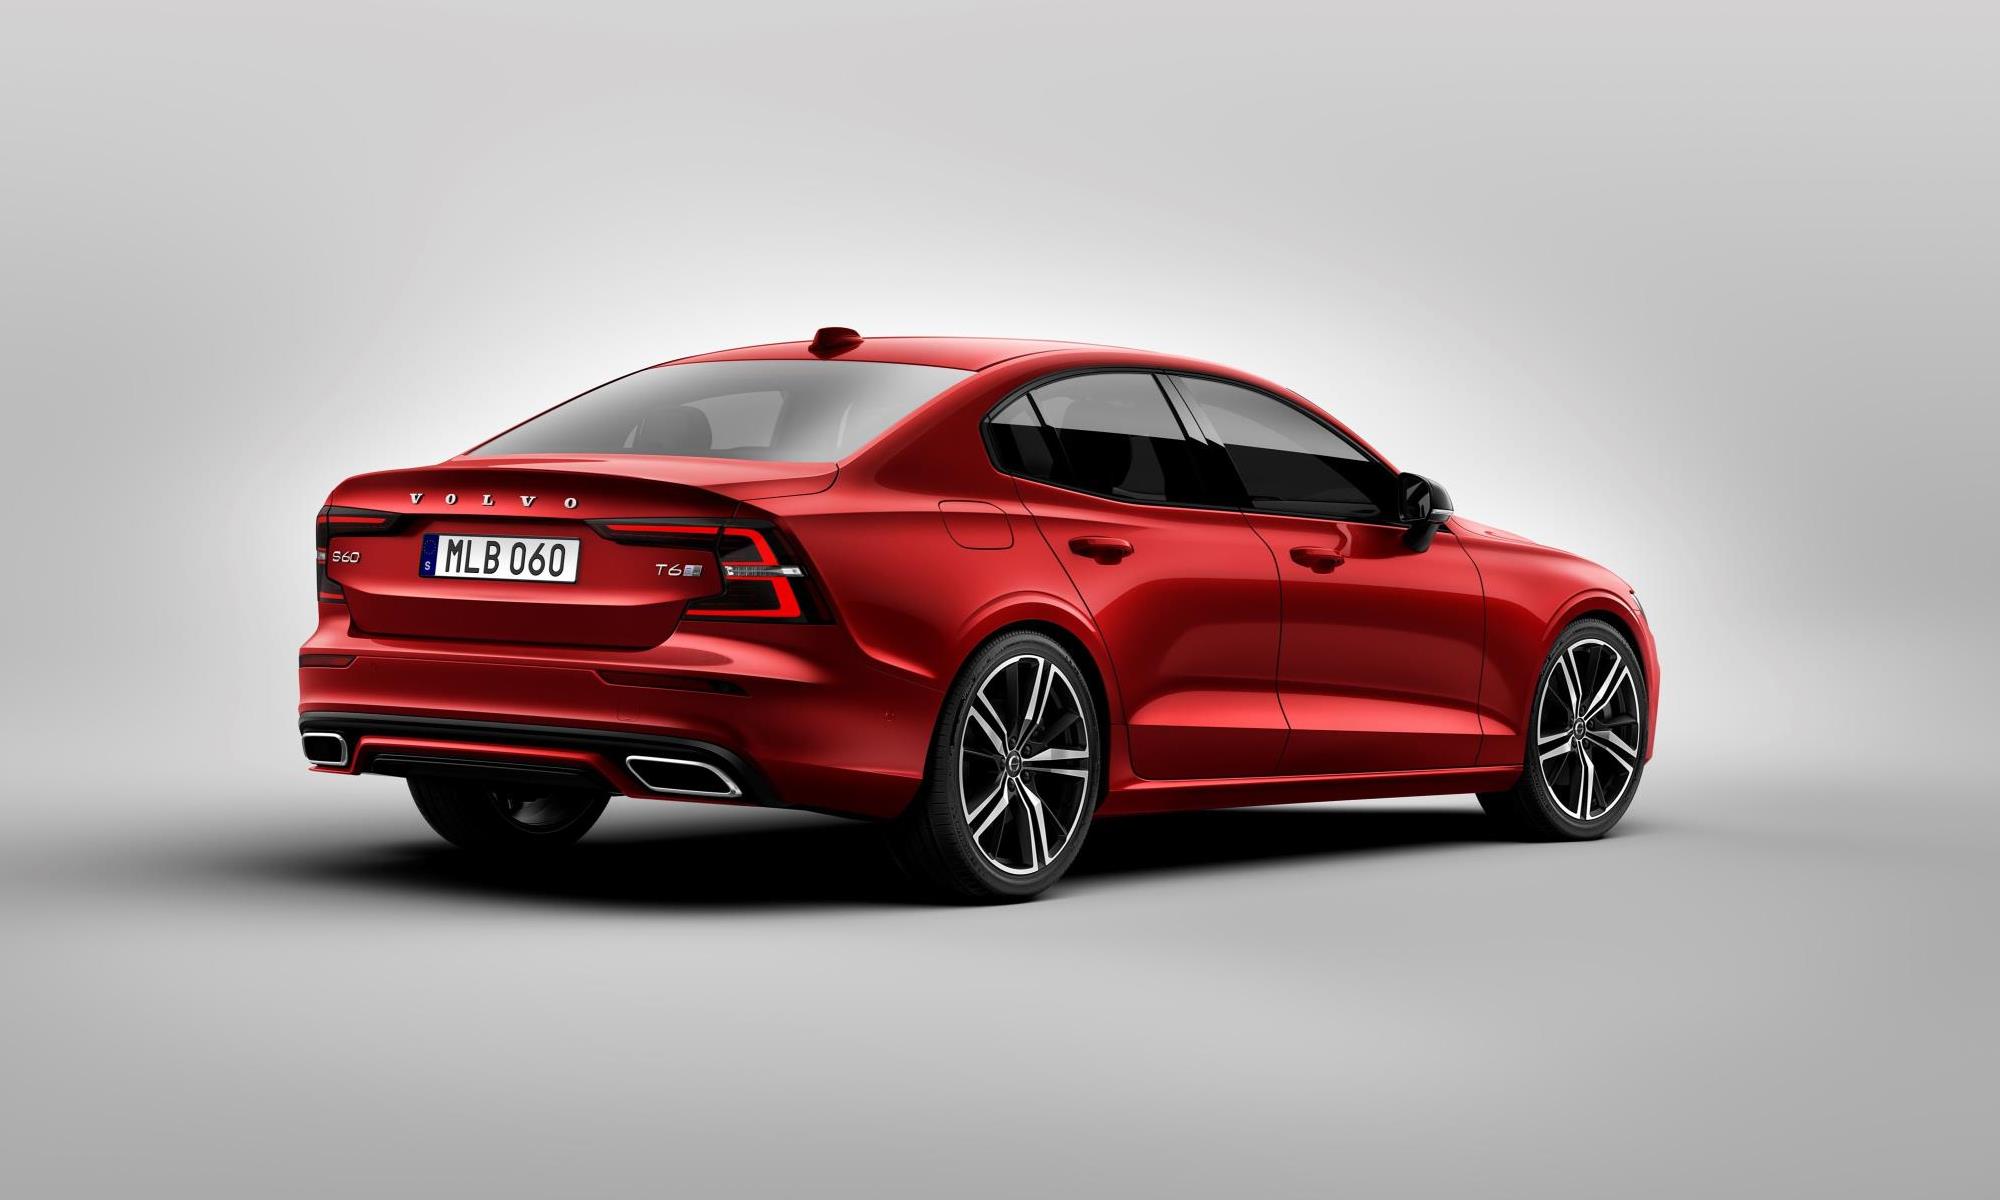 The new Volvo S60 has just been launched and we have details
